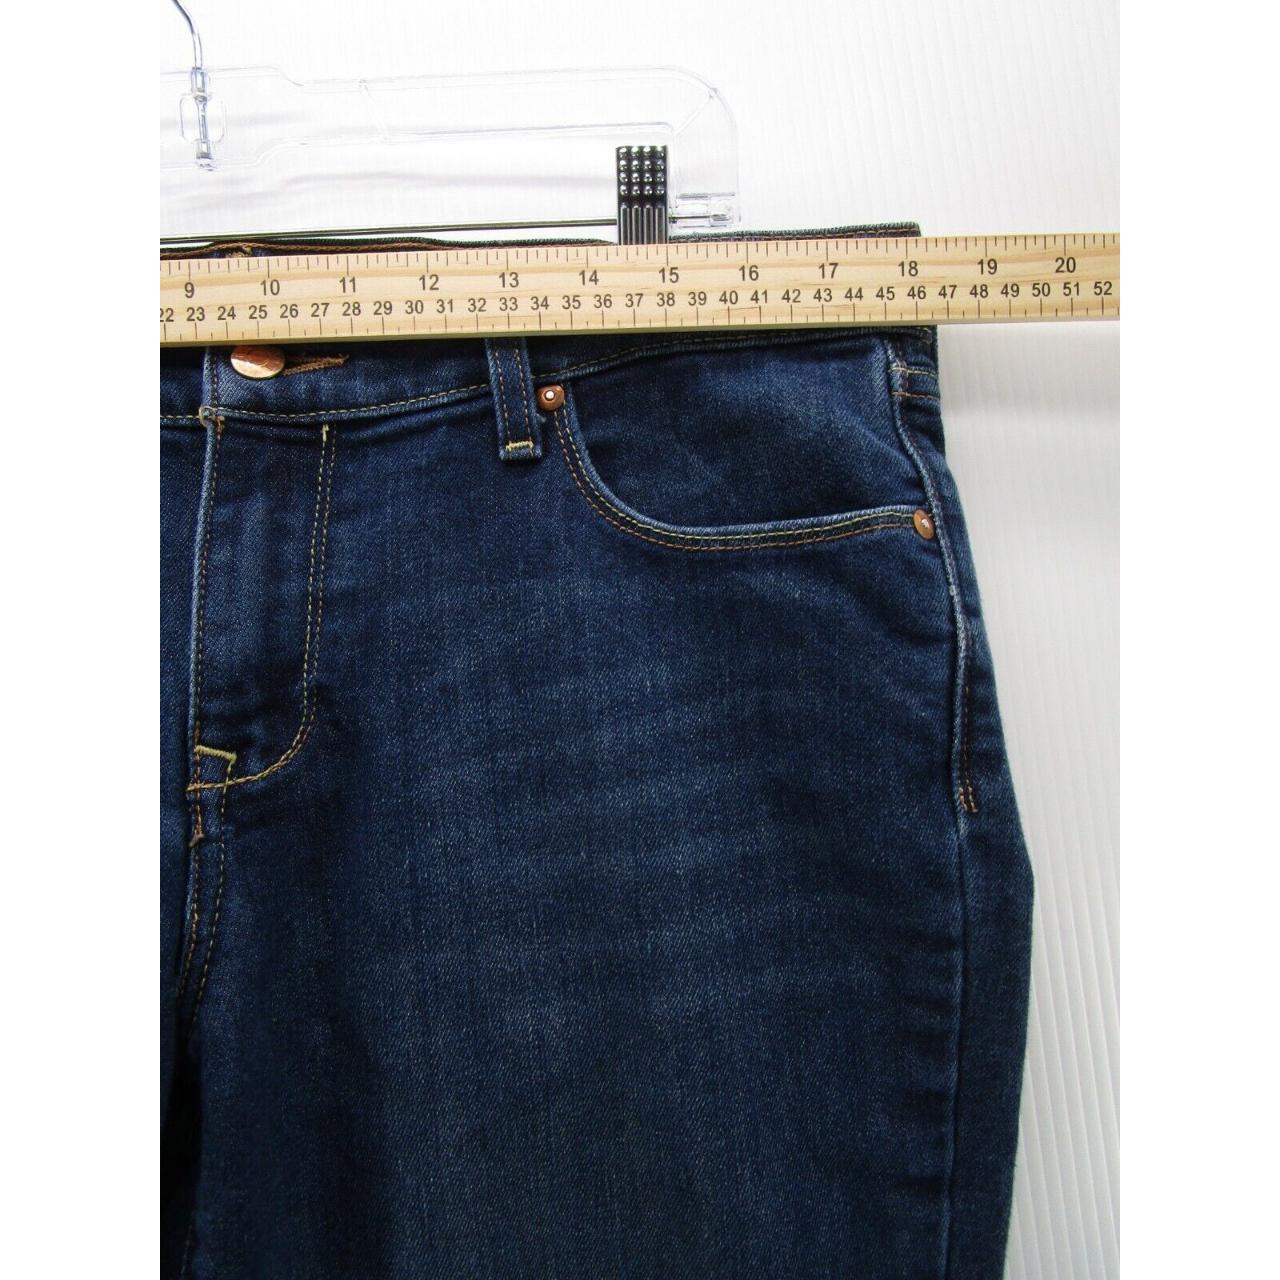 Product Image 2 - Old Navy Jeans Women 14